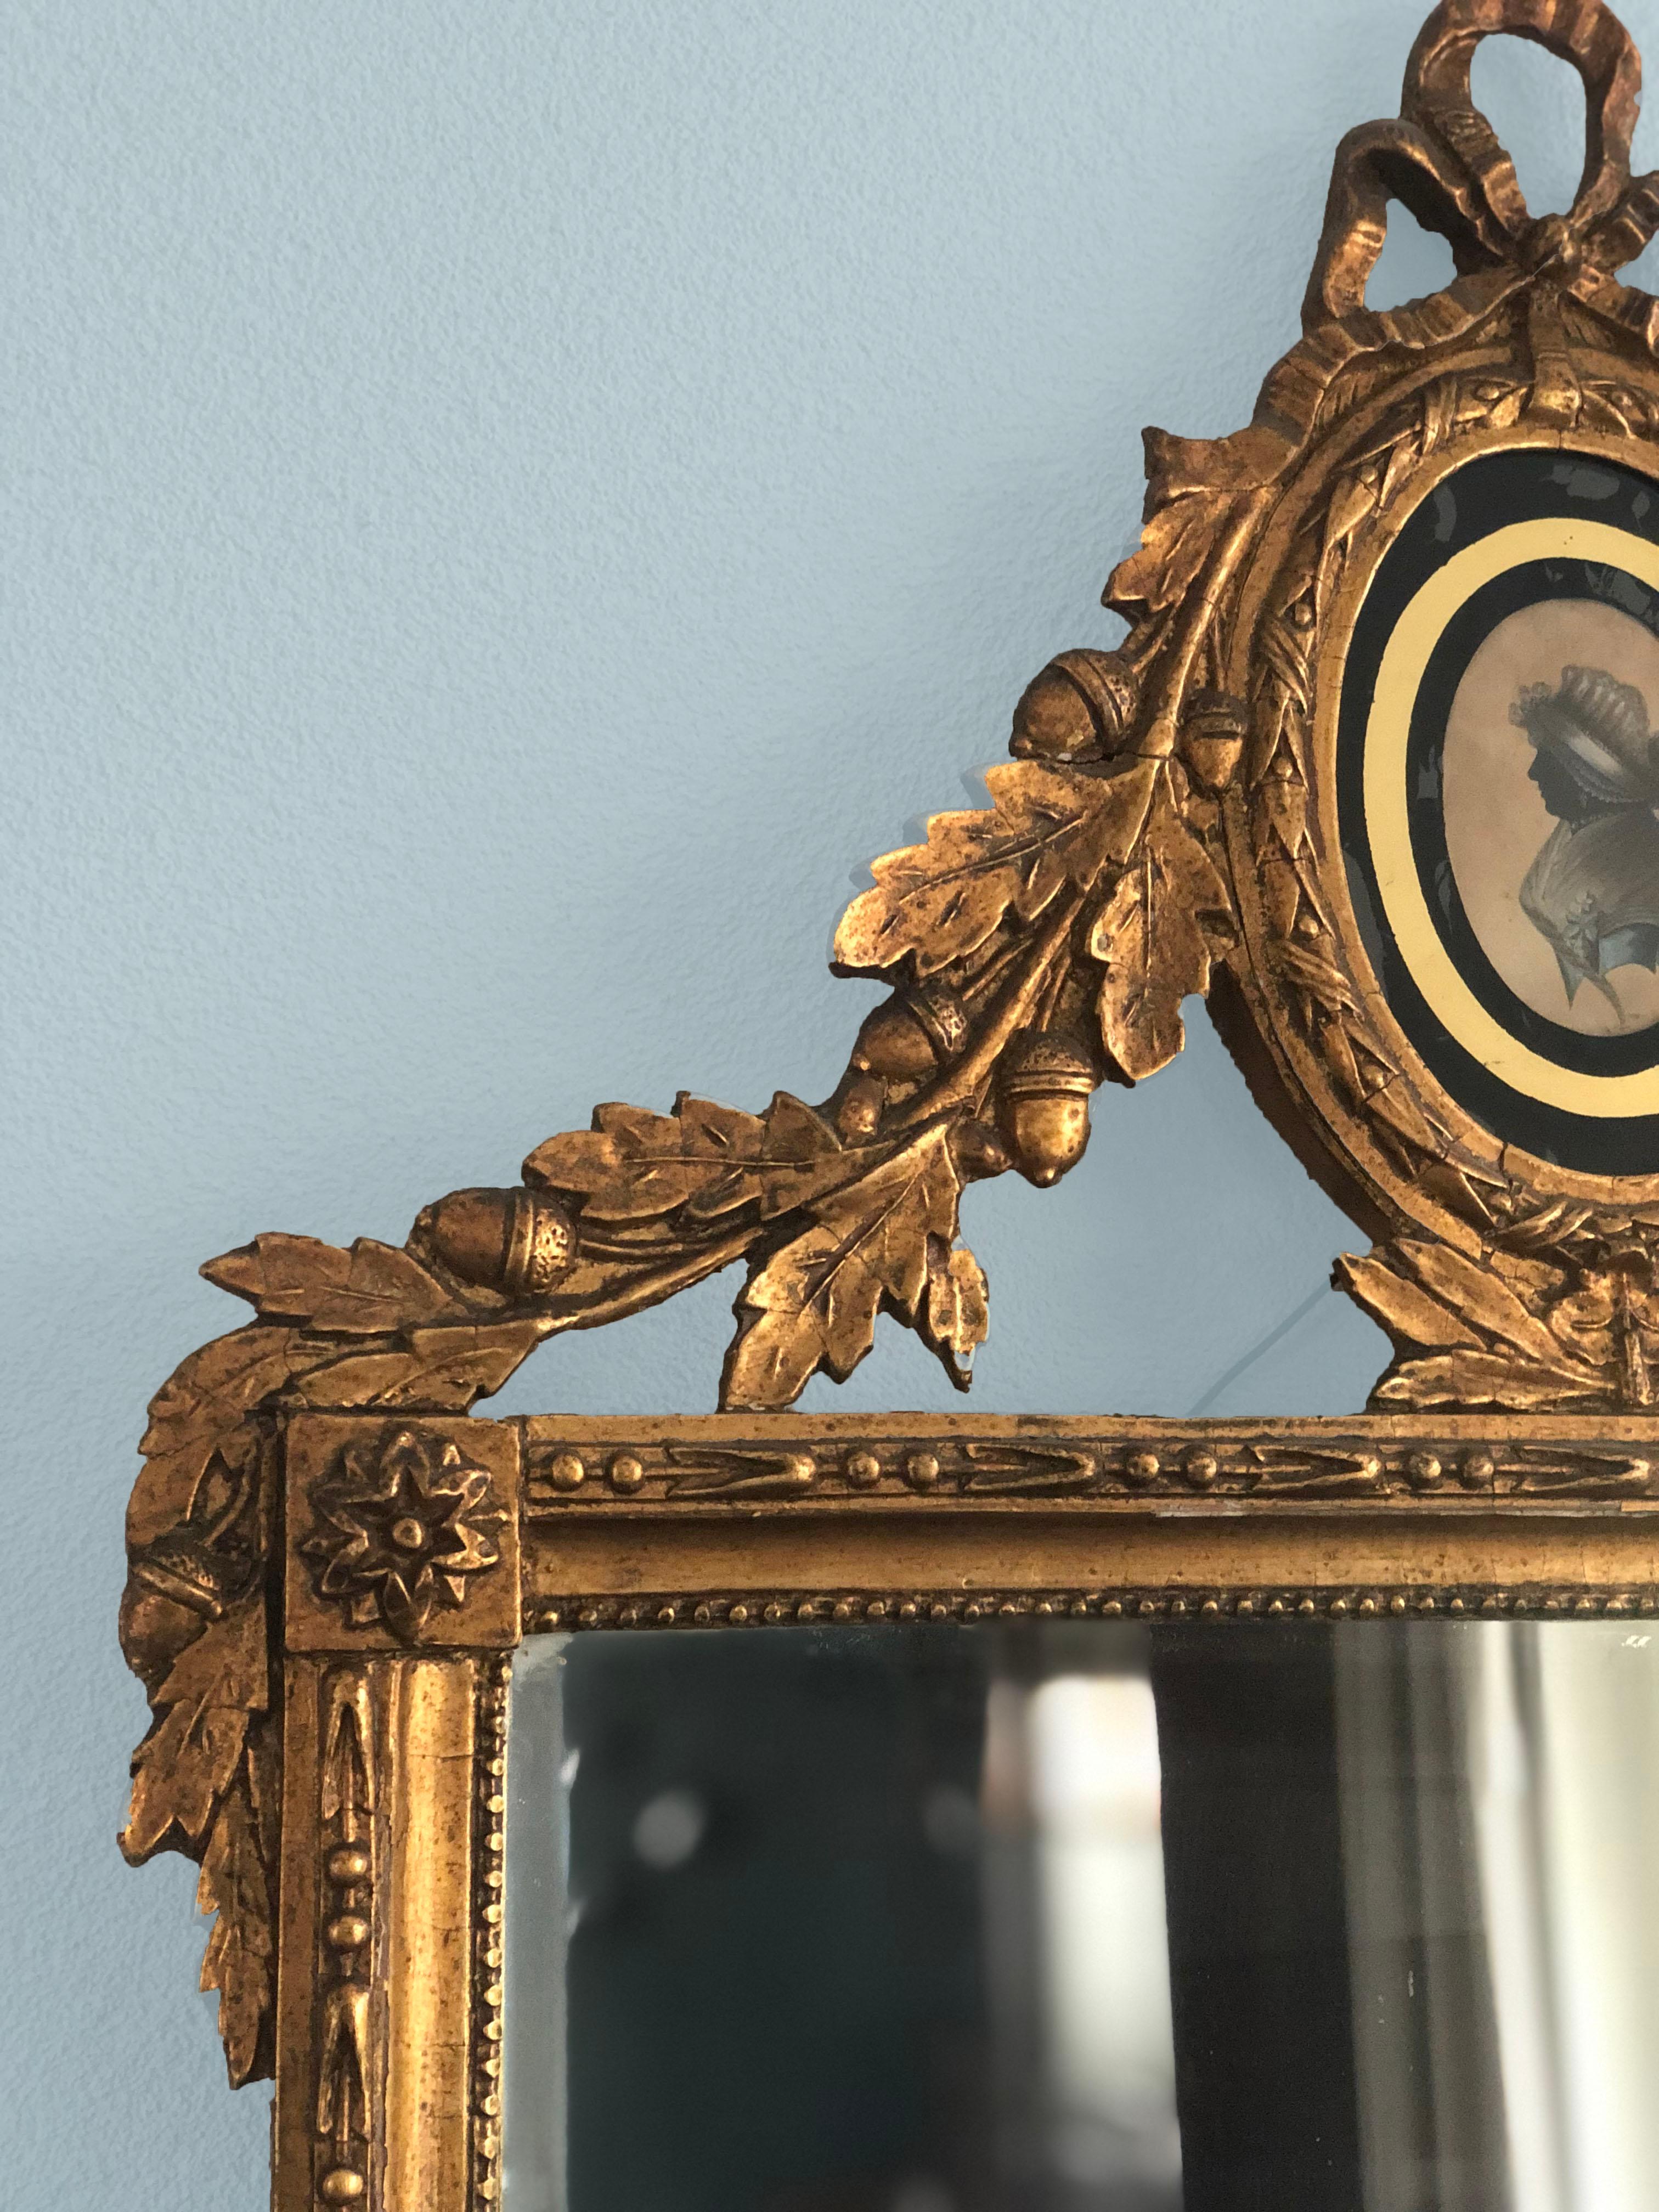 A Dutch 18th century rectangular giltwood Louis XVI mirror in very good condition. The mirror has a basswood frame surrounded by a pearl rim with decoration of bay leaves and berries. On the top it has a medallion in 'Verre églomisé' with a